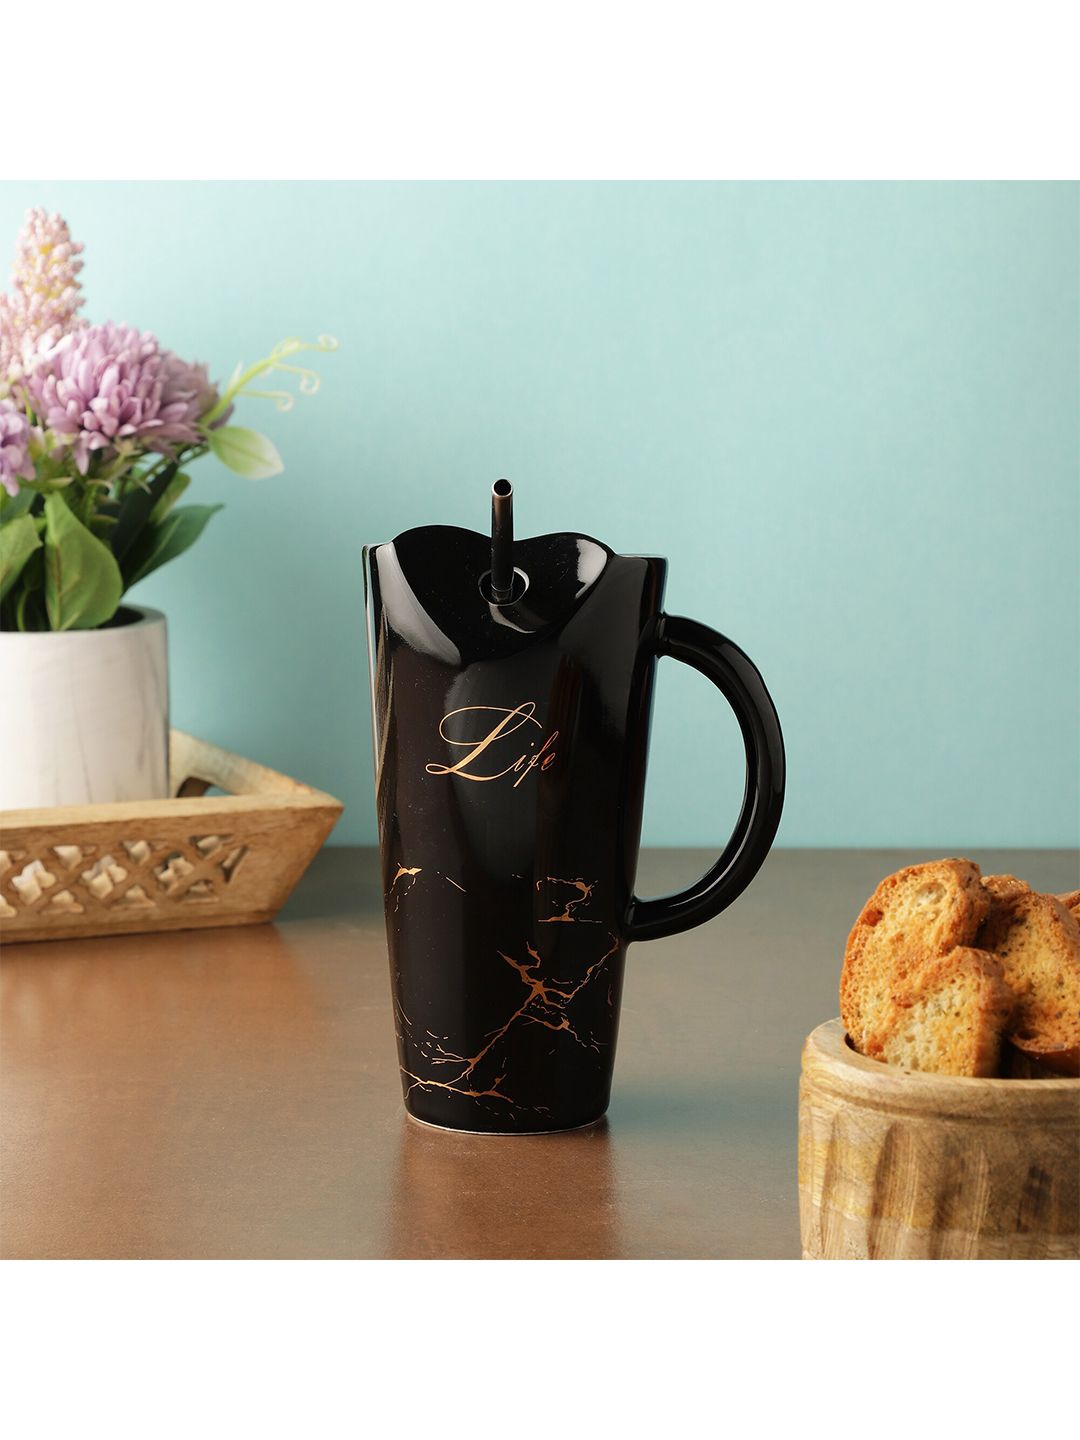 The Decor Mart Black & Gold-Toned Text or Slogans Printed Ceramic Glossy Mugs Set of Cups and Mugs Price in India